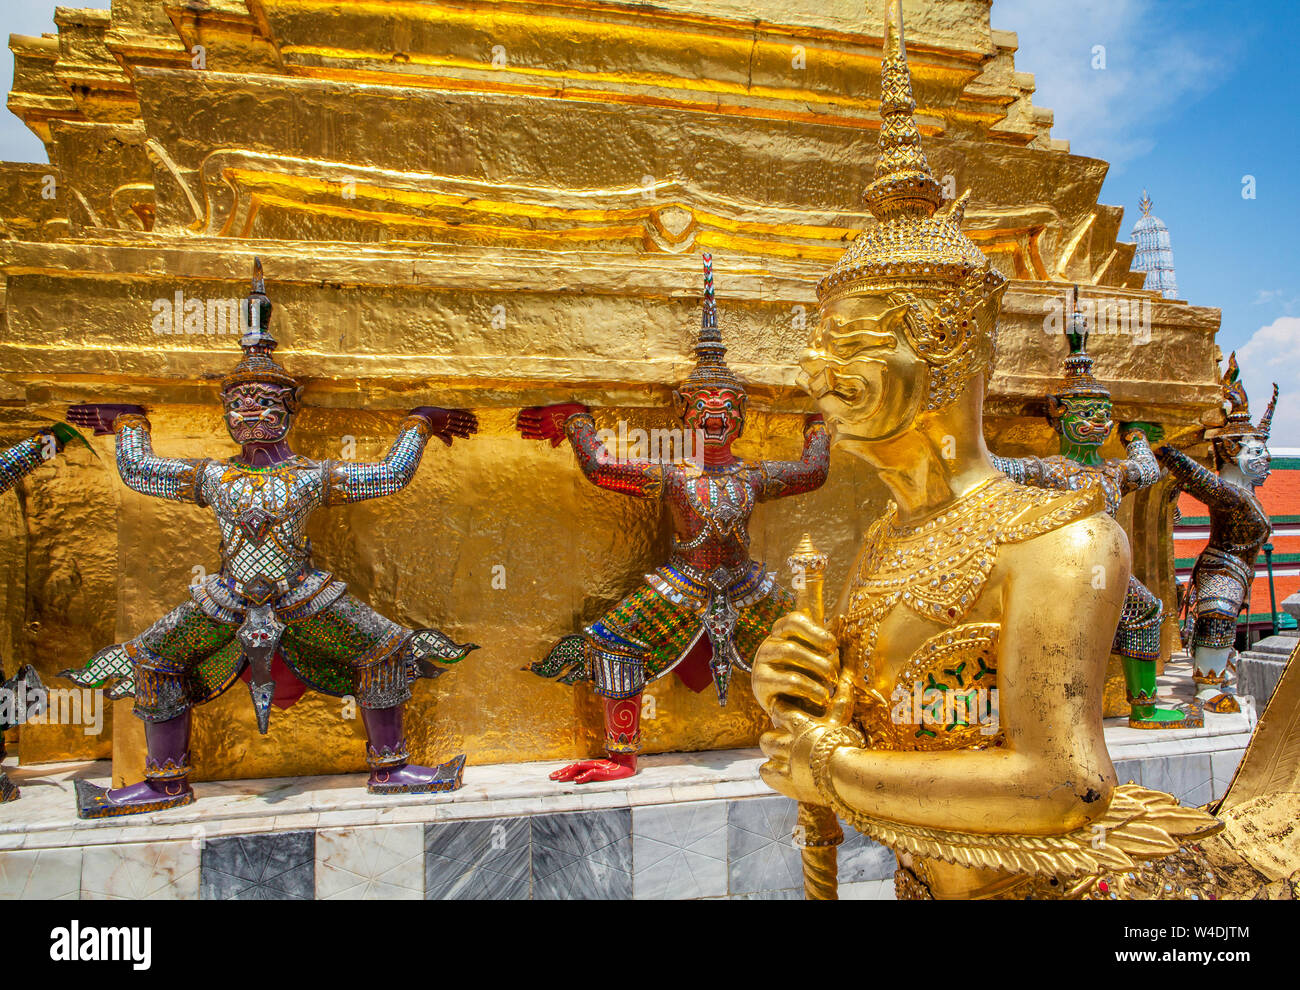 Garuda and Yaksha mythical warrior statues guard the guilded Chedi near the temple of the Emerald Buddha at the Grand Palace in Bangkok, Thailand. Stock Photo